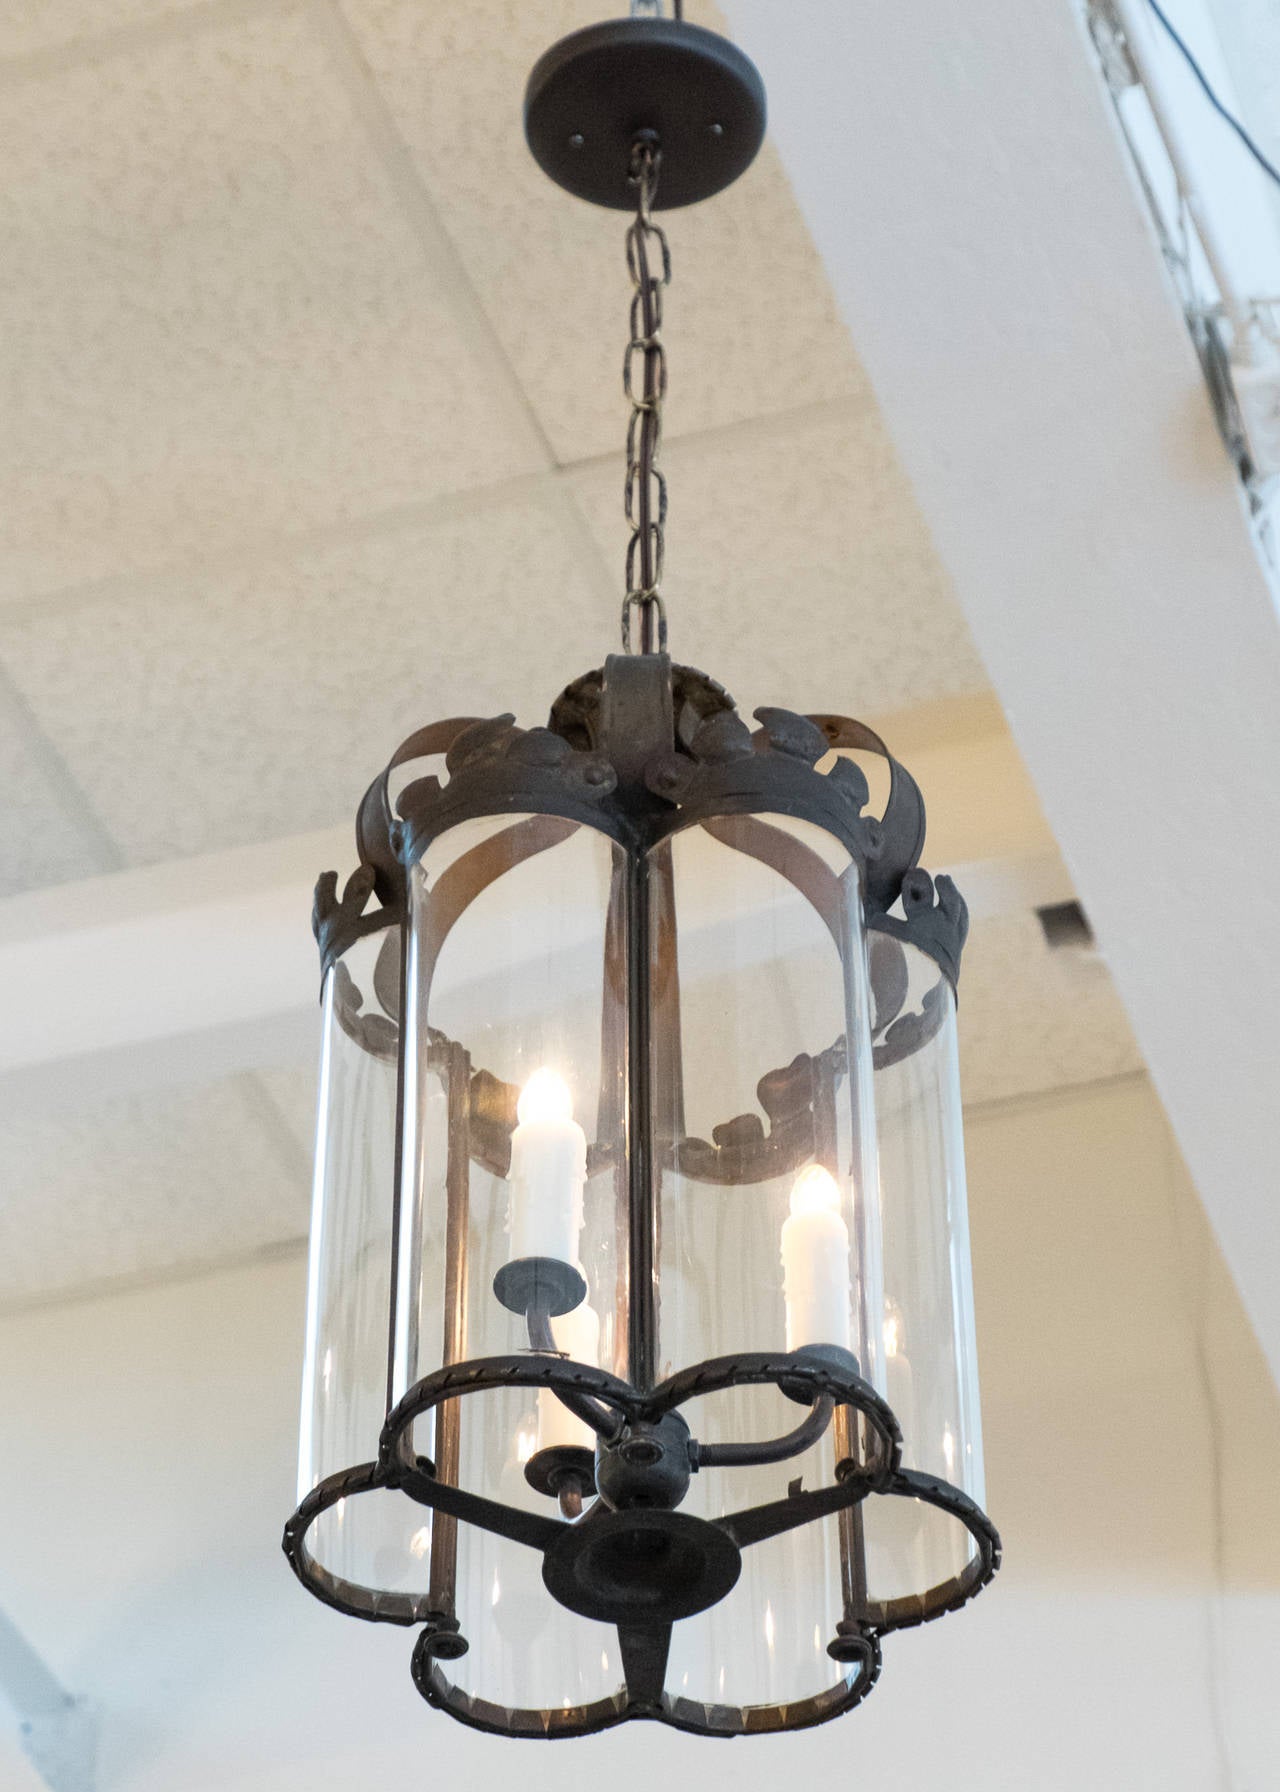 Superb French antique lantern in patinated brass and curved antique glass, newly electrified with a three candelabrum cluster. We love the unique shape and curved glass. Height including chain and canopy is 35.25 in.